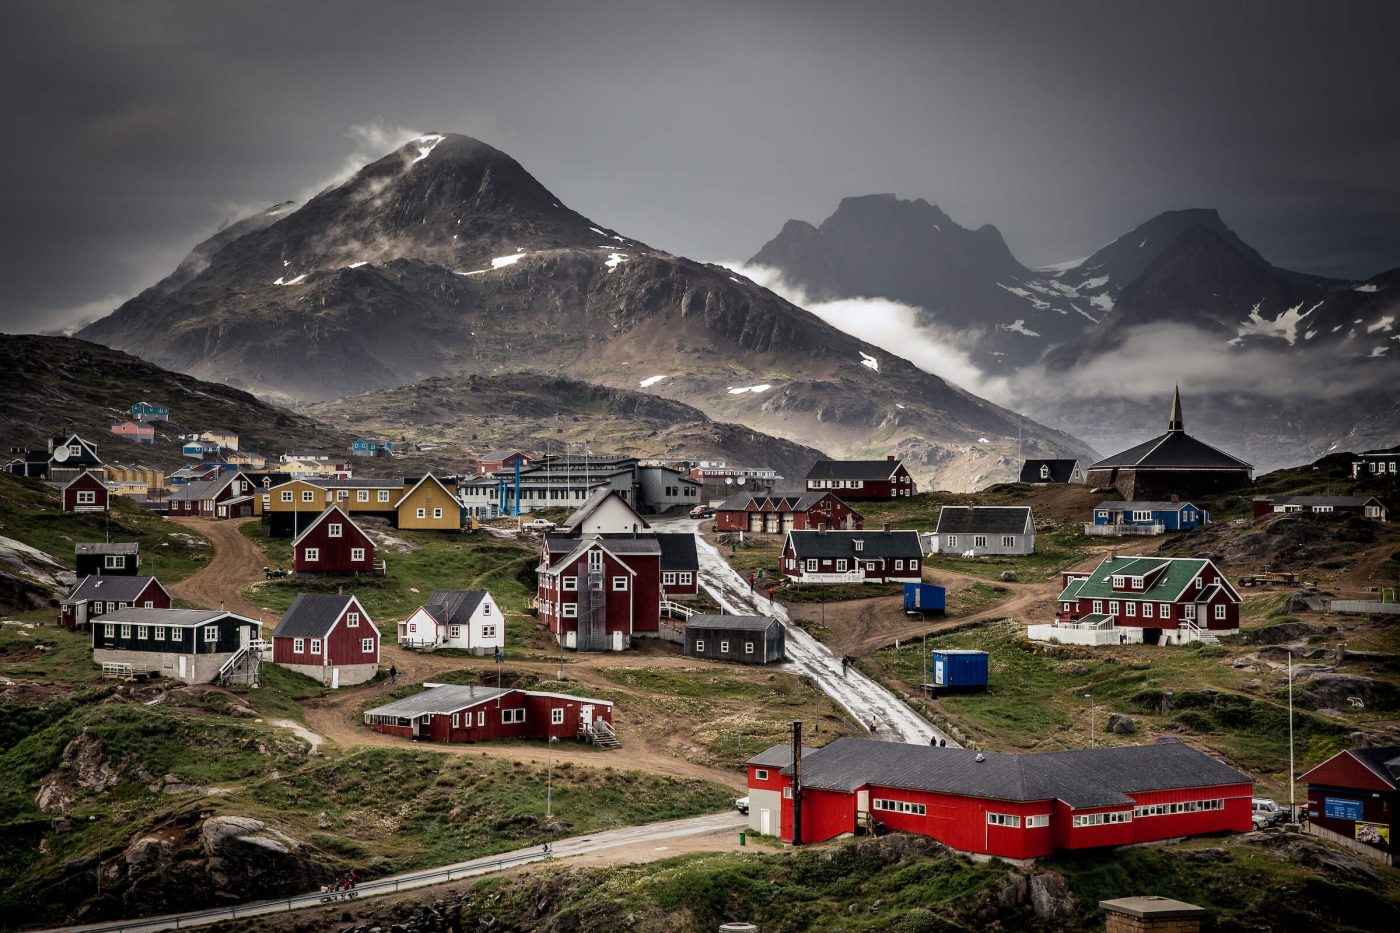 A rainy day view over Tasiilaq in East Greenland. By Mads Pihl